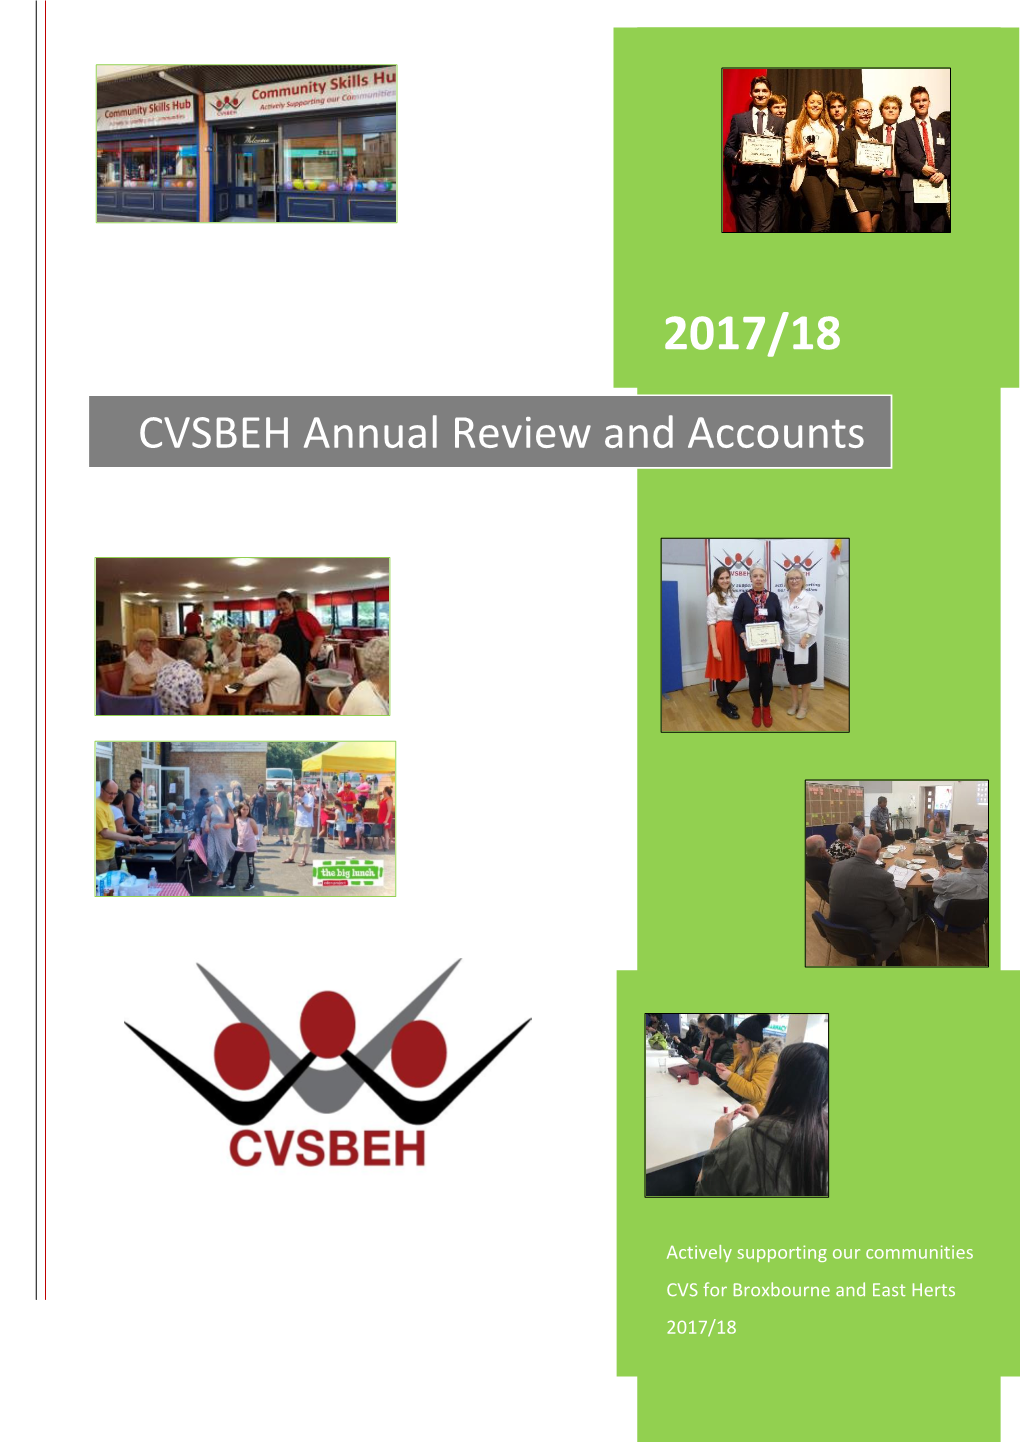 CVSBEH Annual Review and Accounts